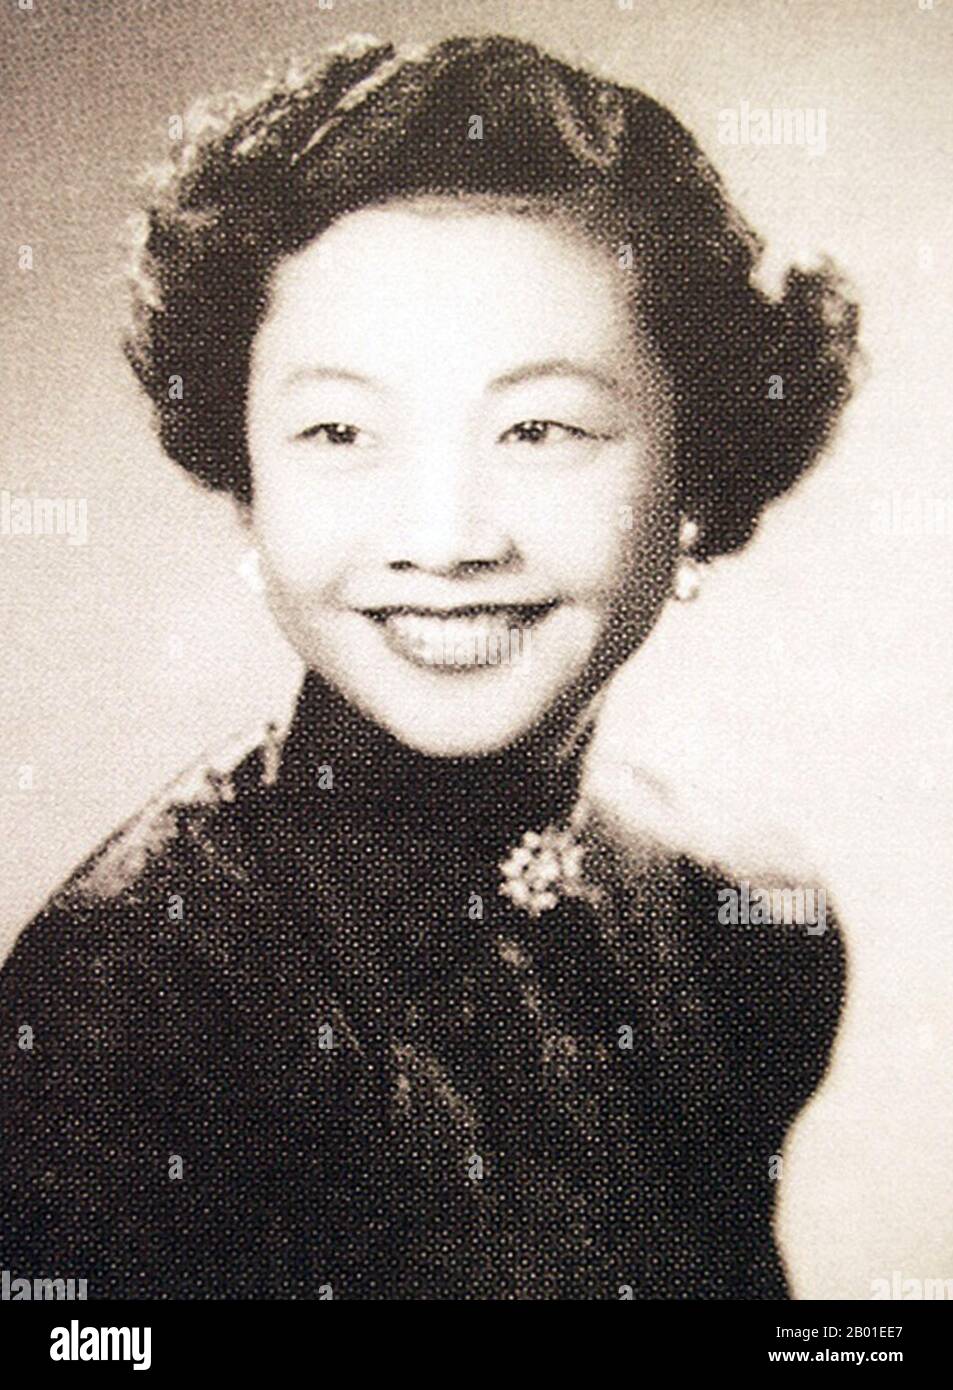 Yao Lee (姚莉), also known as Yiu Lei and Miss Hue Lee, was a Chinese singer  from the 1930s to the 1970s. By the 1940s, she became one of the seven great